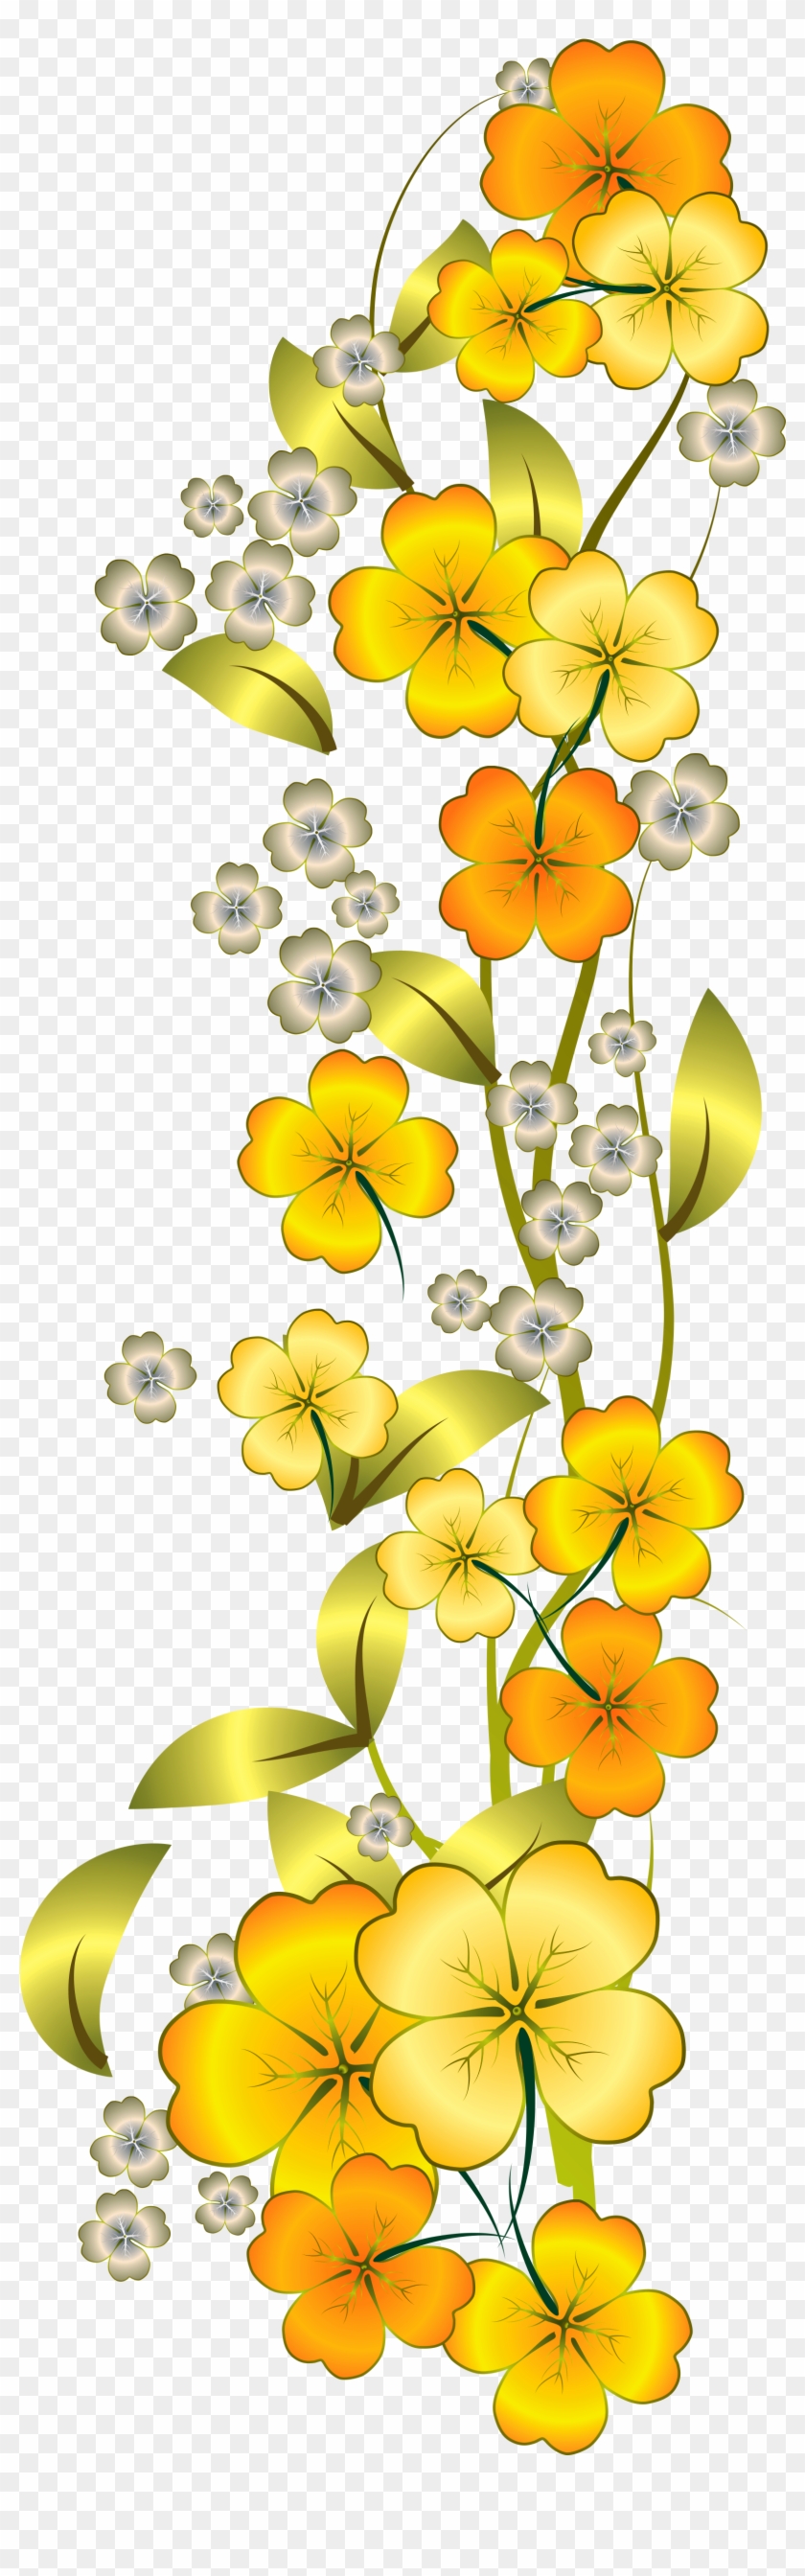 Yellow Flower Decor Png Clipart - Yellow Flower Clipart #284888